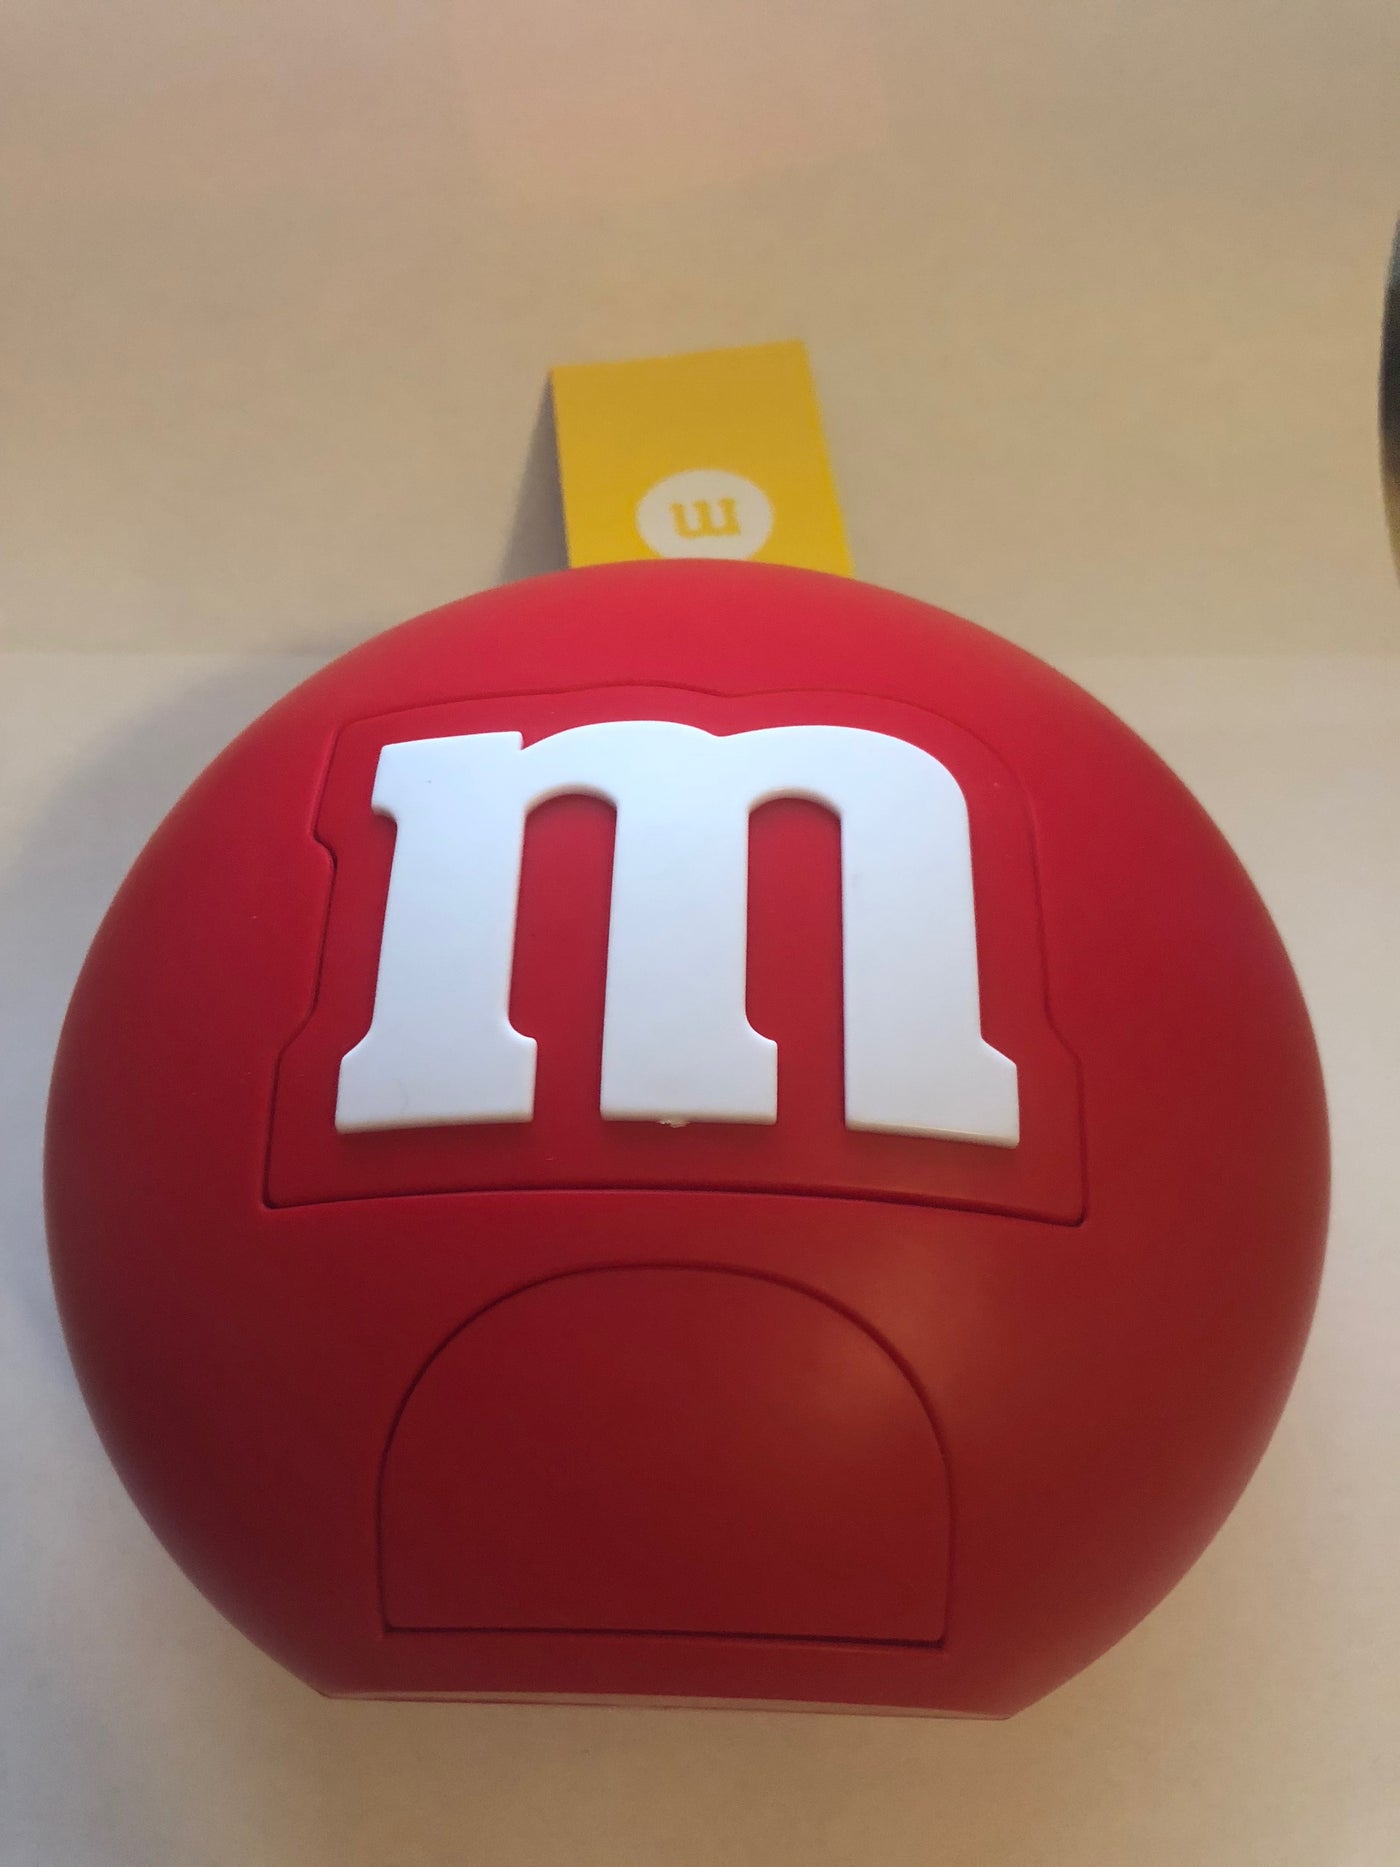 M&M's World Candy Red Round Dispenser New with Tags